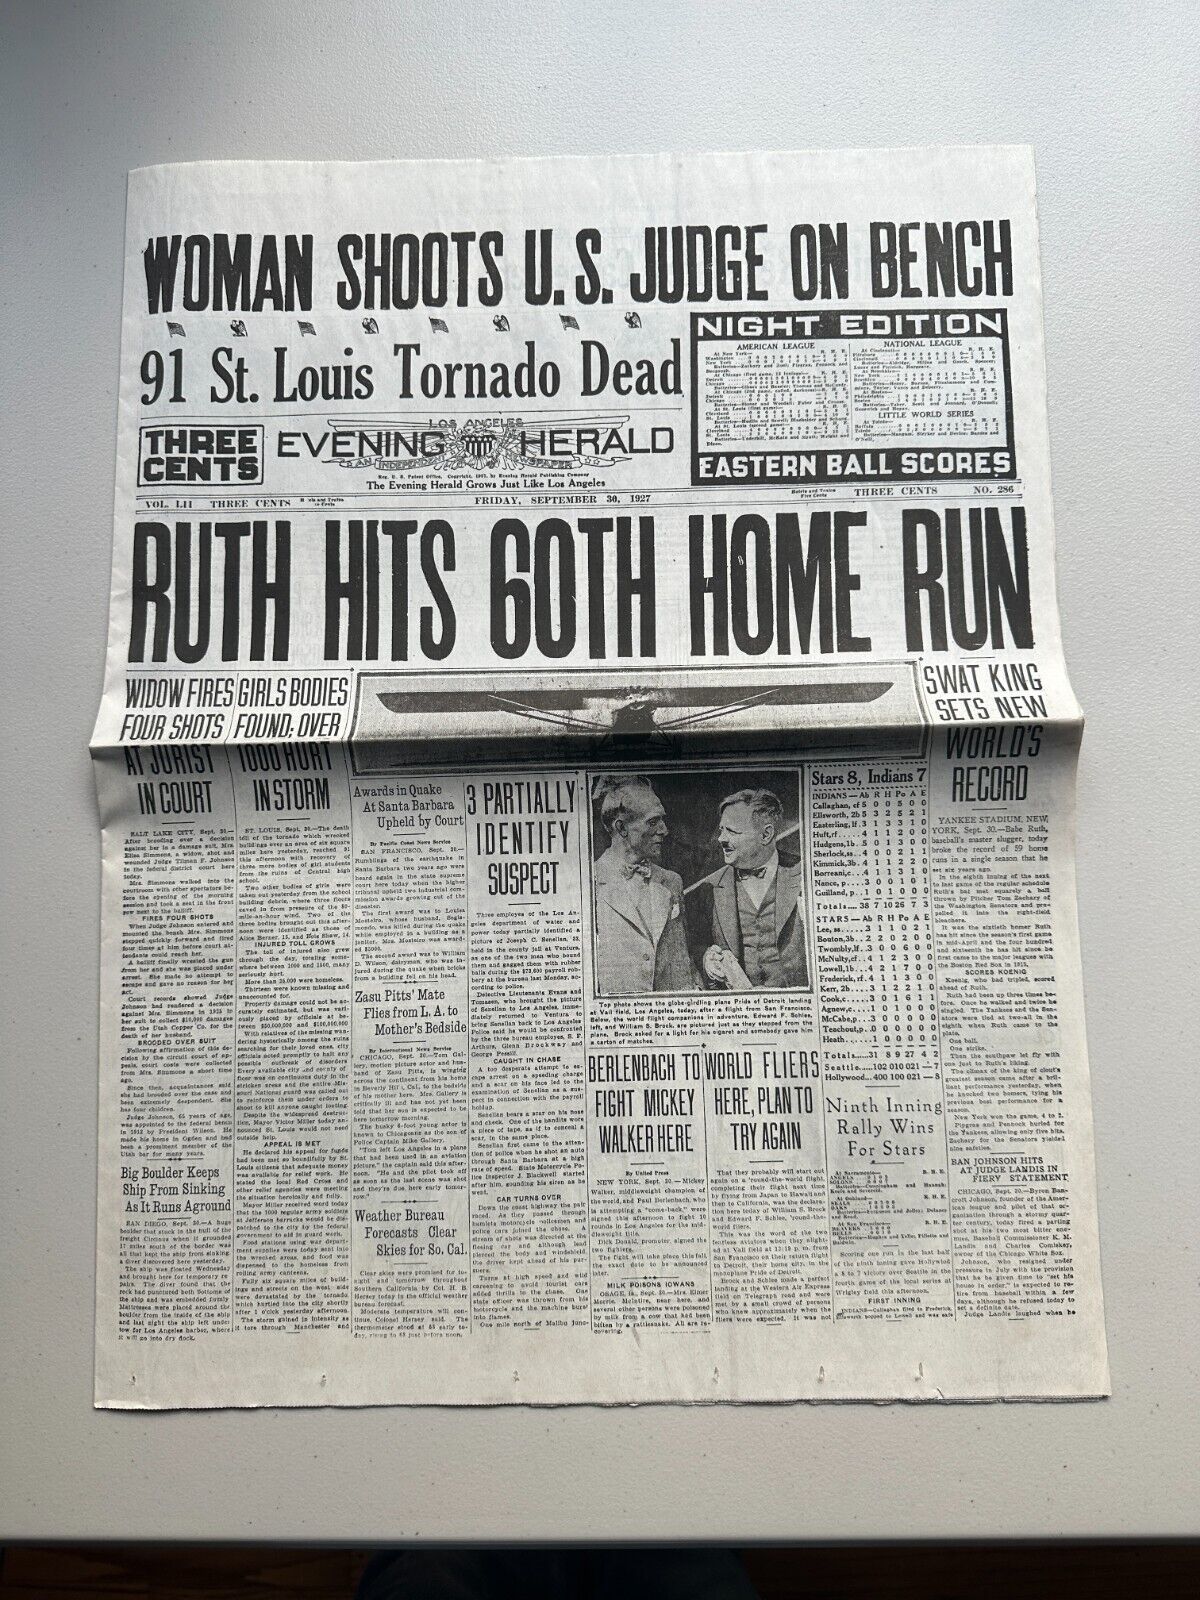 September 30 1927 Babe Ruth 60th Home Run Los Angeles 1920's Vintage Newspaper